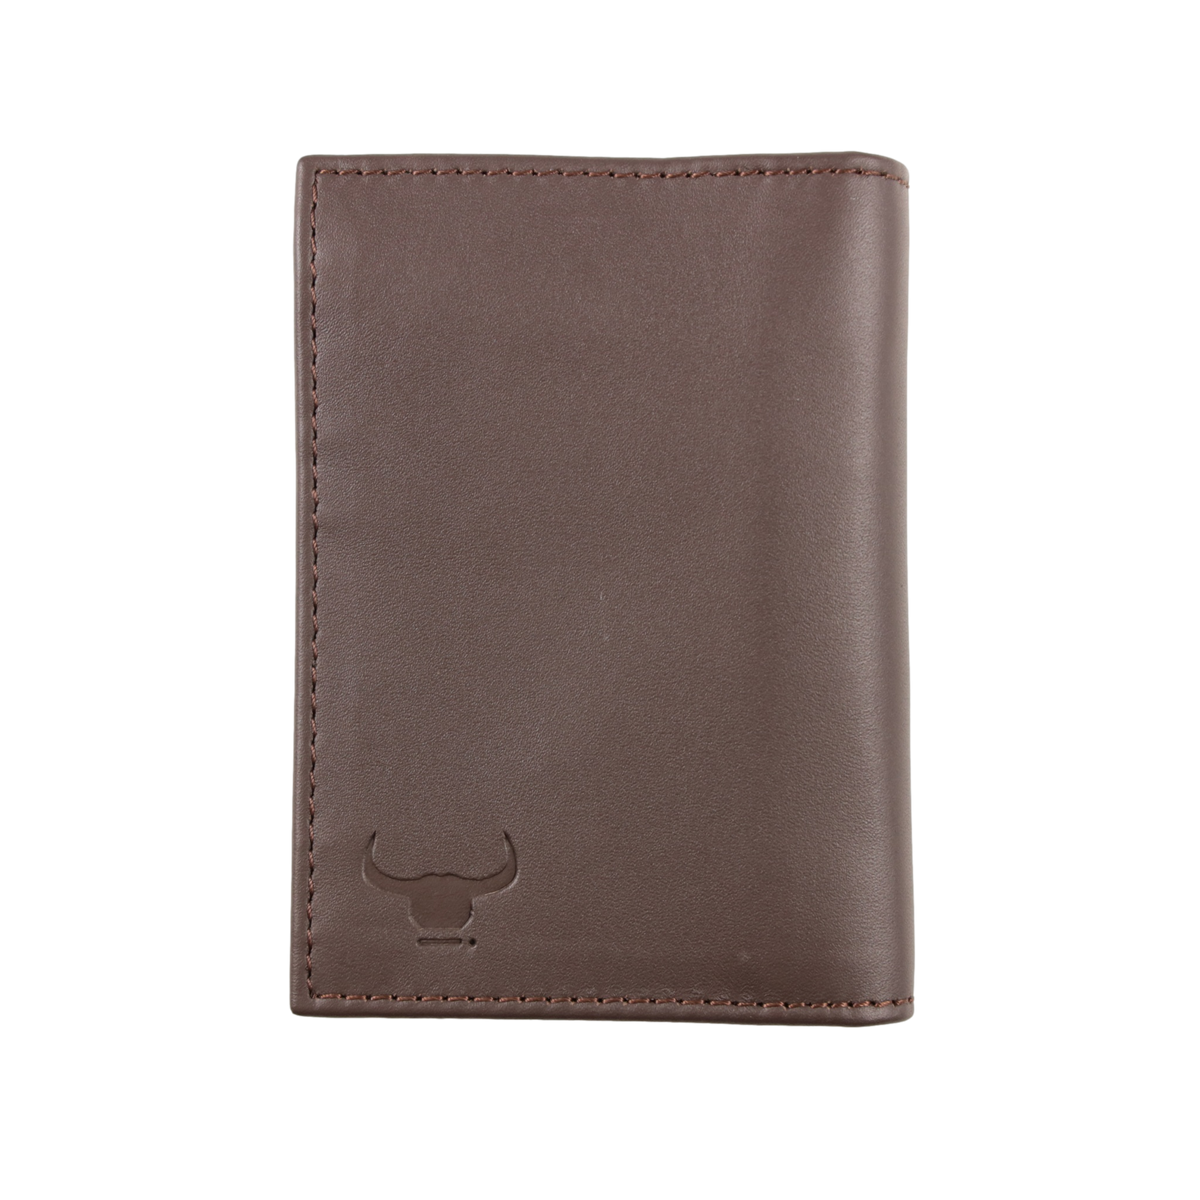 Austin Leather Wallet - Chocolate